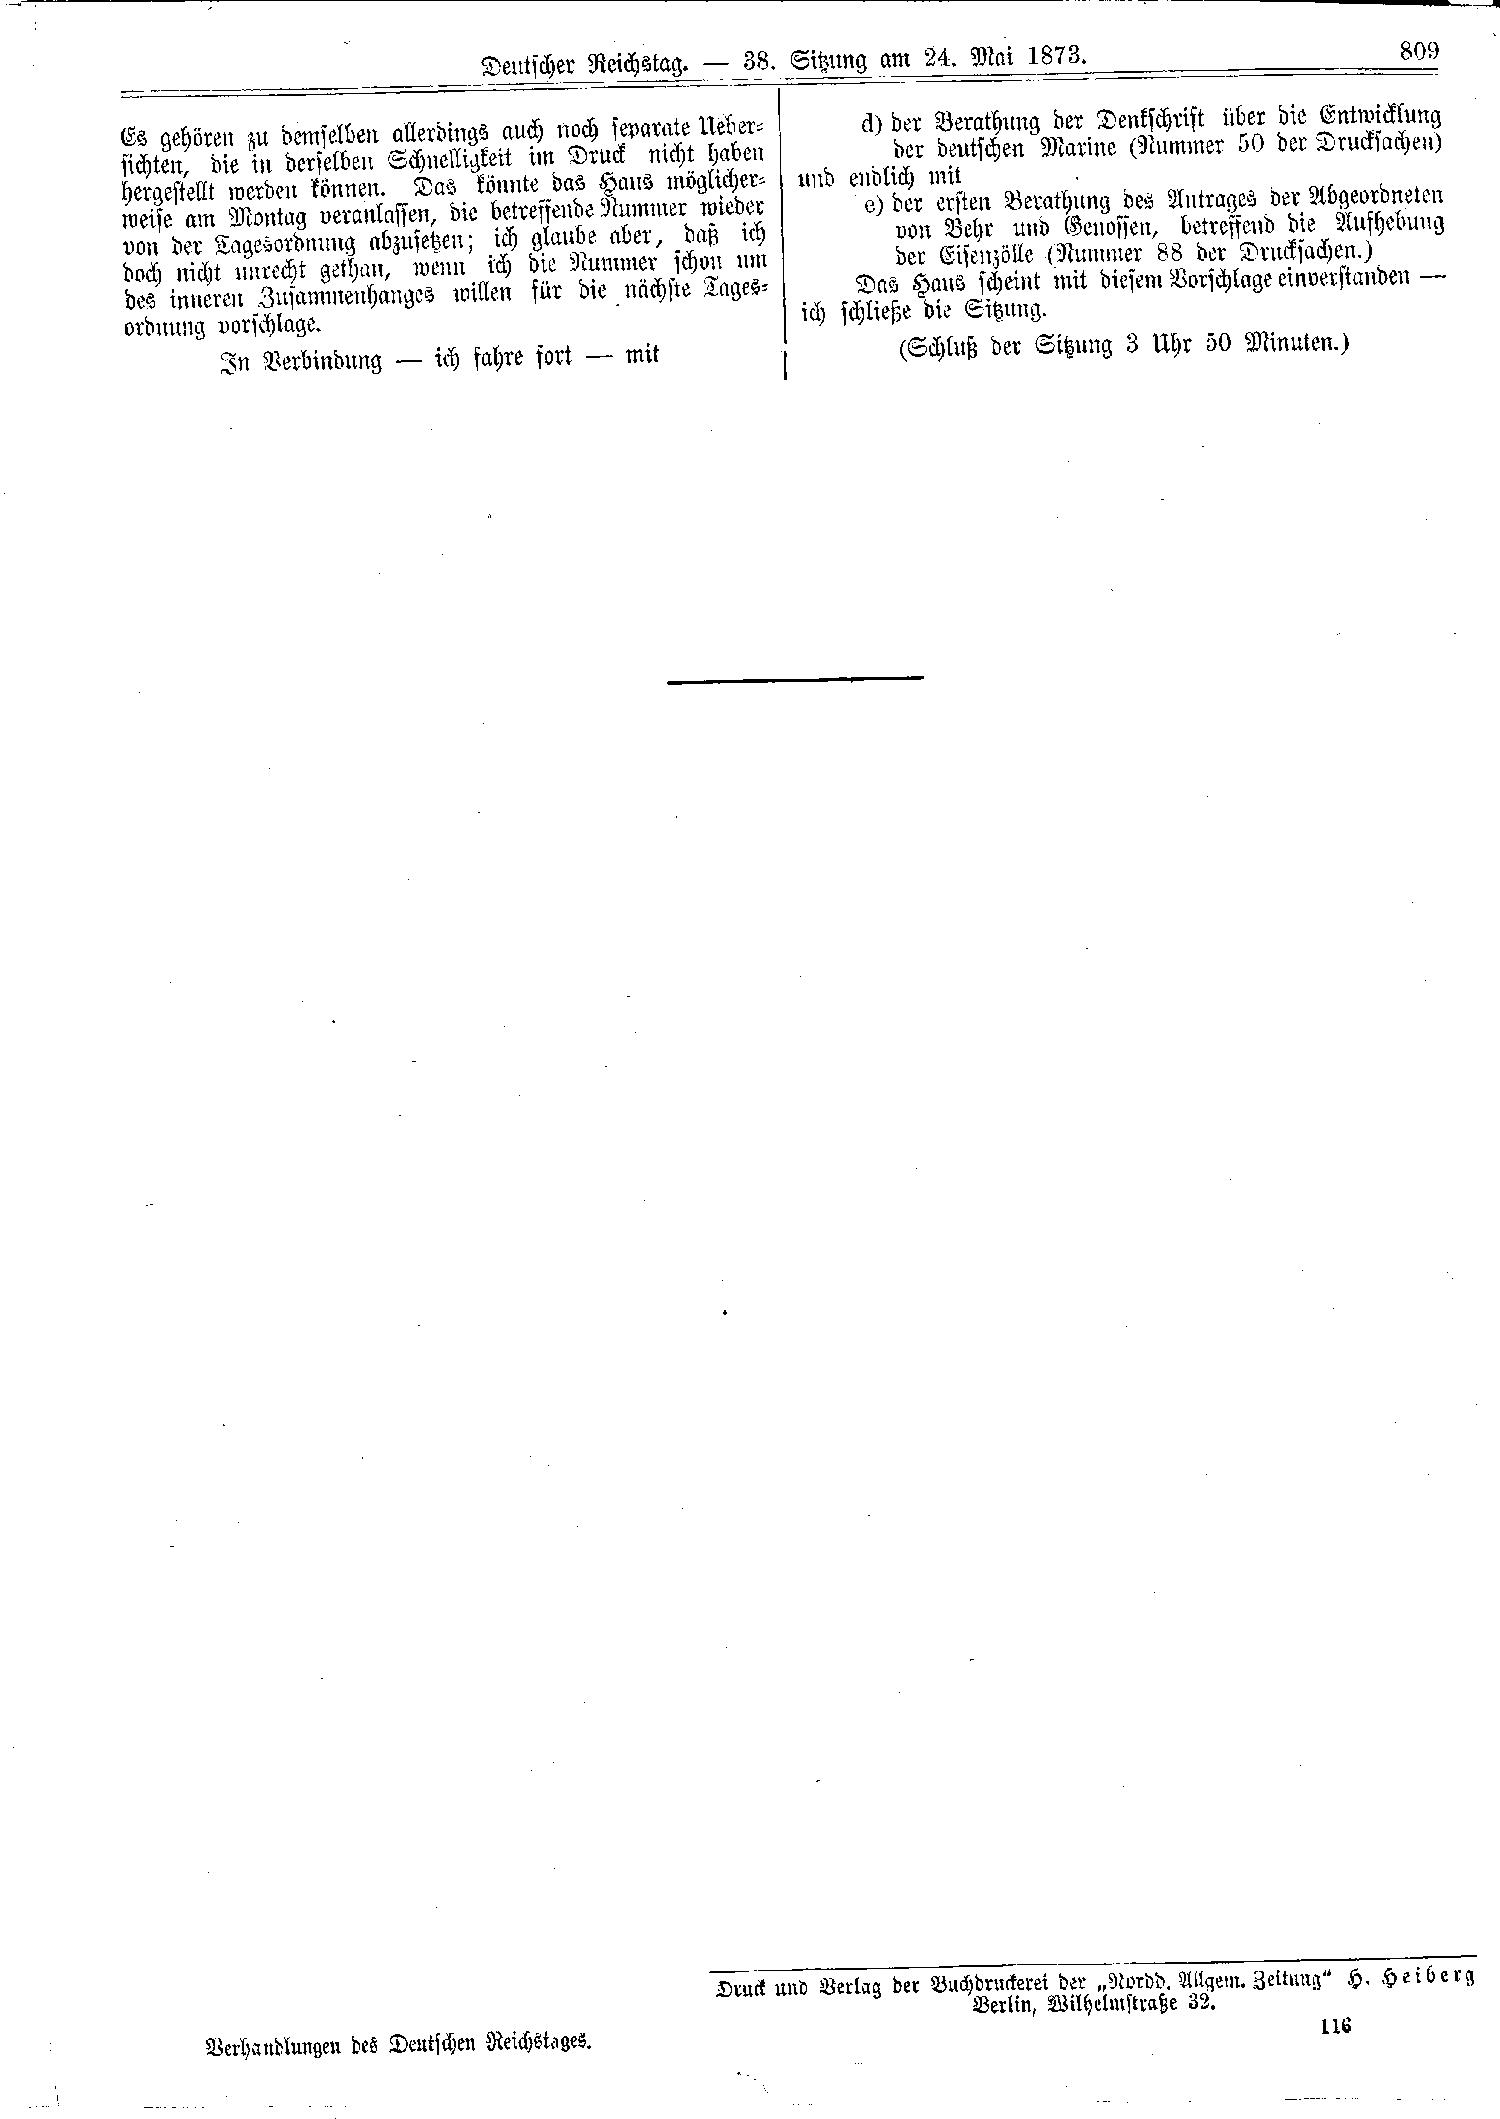 Scan of page 809